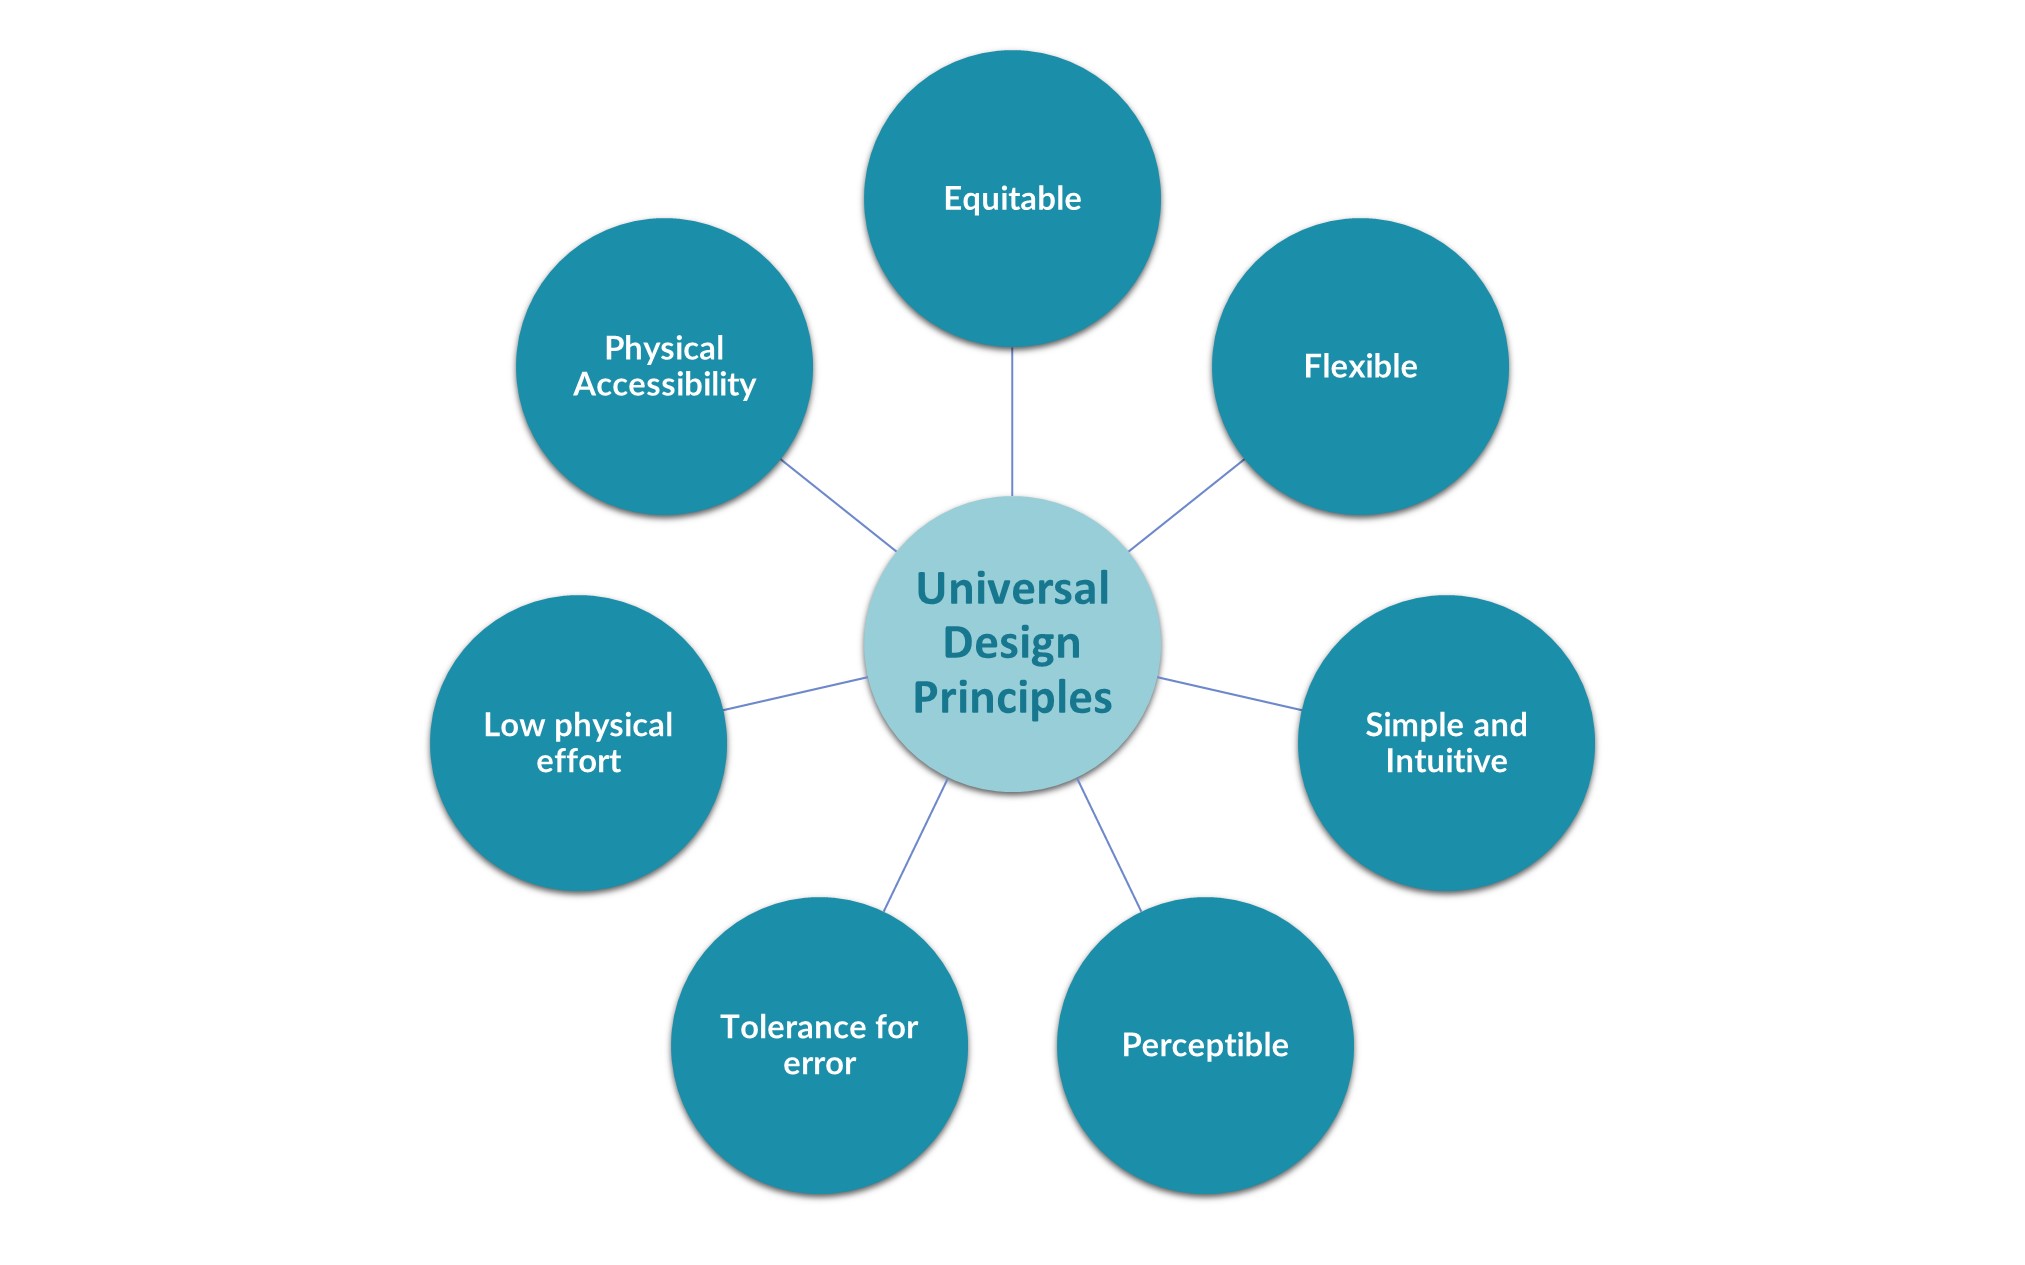 7 Principles of Universal Design: Equitable, Flexible, Simple and Intuitive, Perceptible, Tolerance for error, Low physical effort, Physical Accessibility